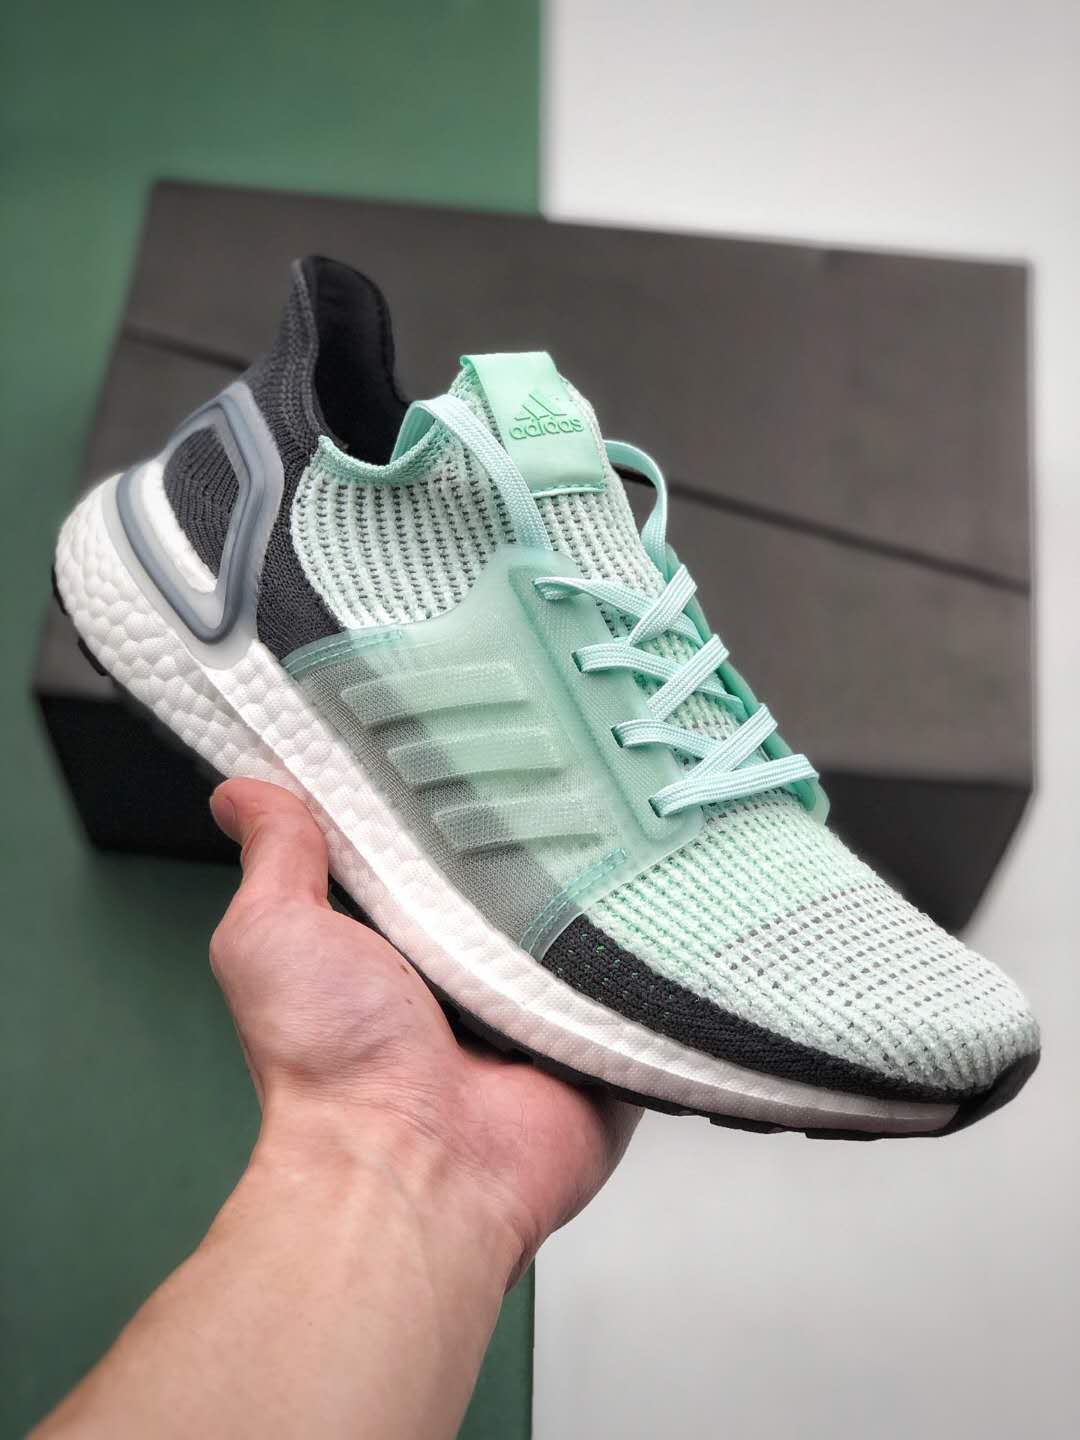 Adidas UltraBoost 19 'Ice Mint' F35285 - Stylish and Comfortable Sneakers | Free Shipping